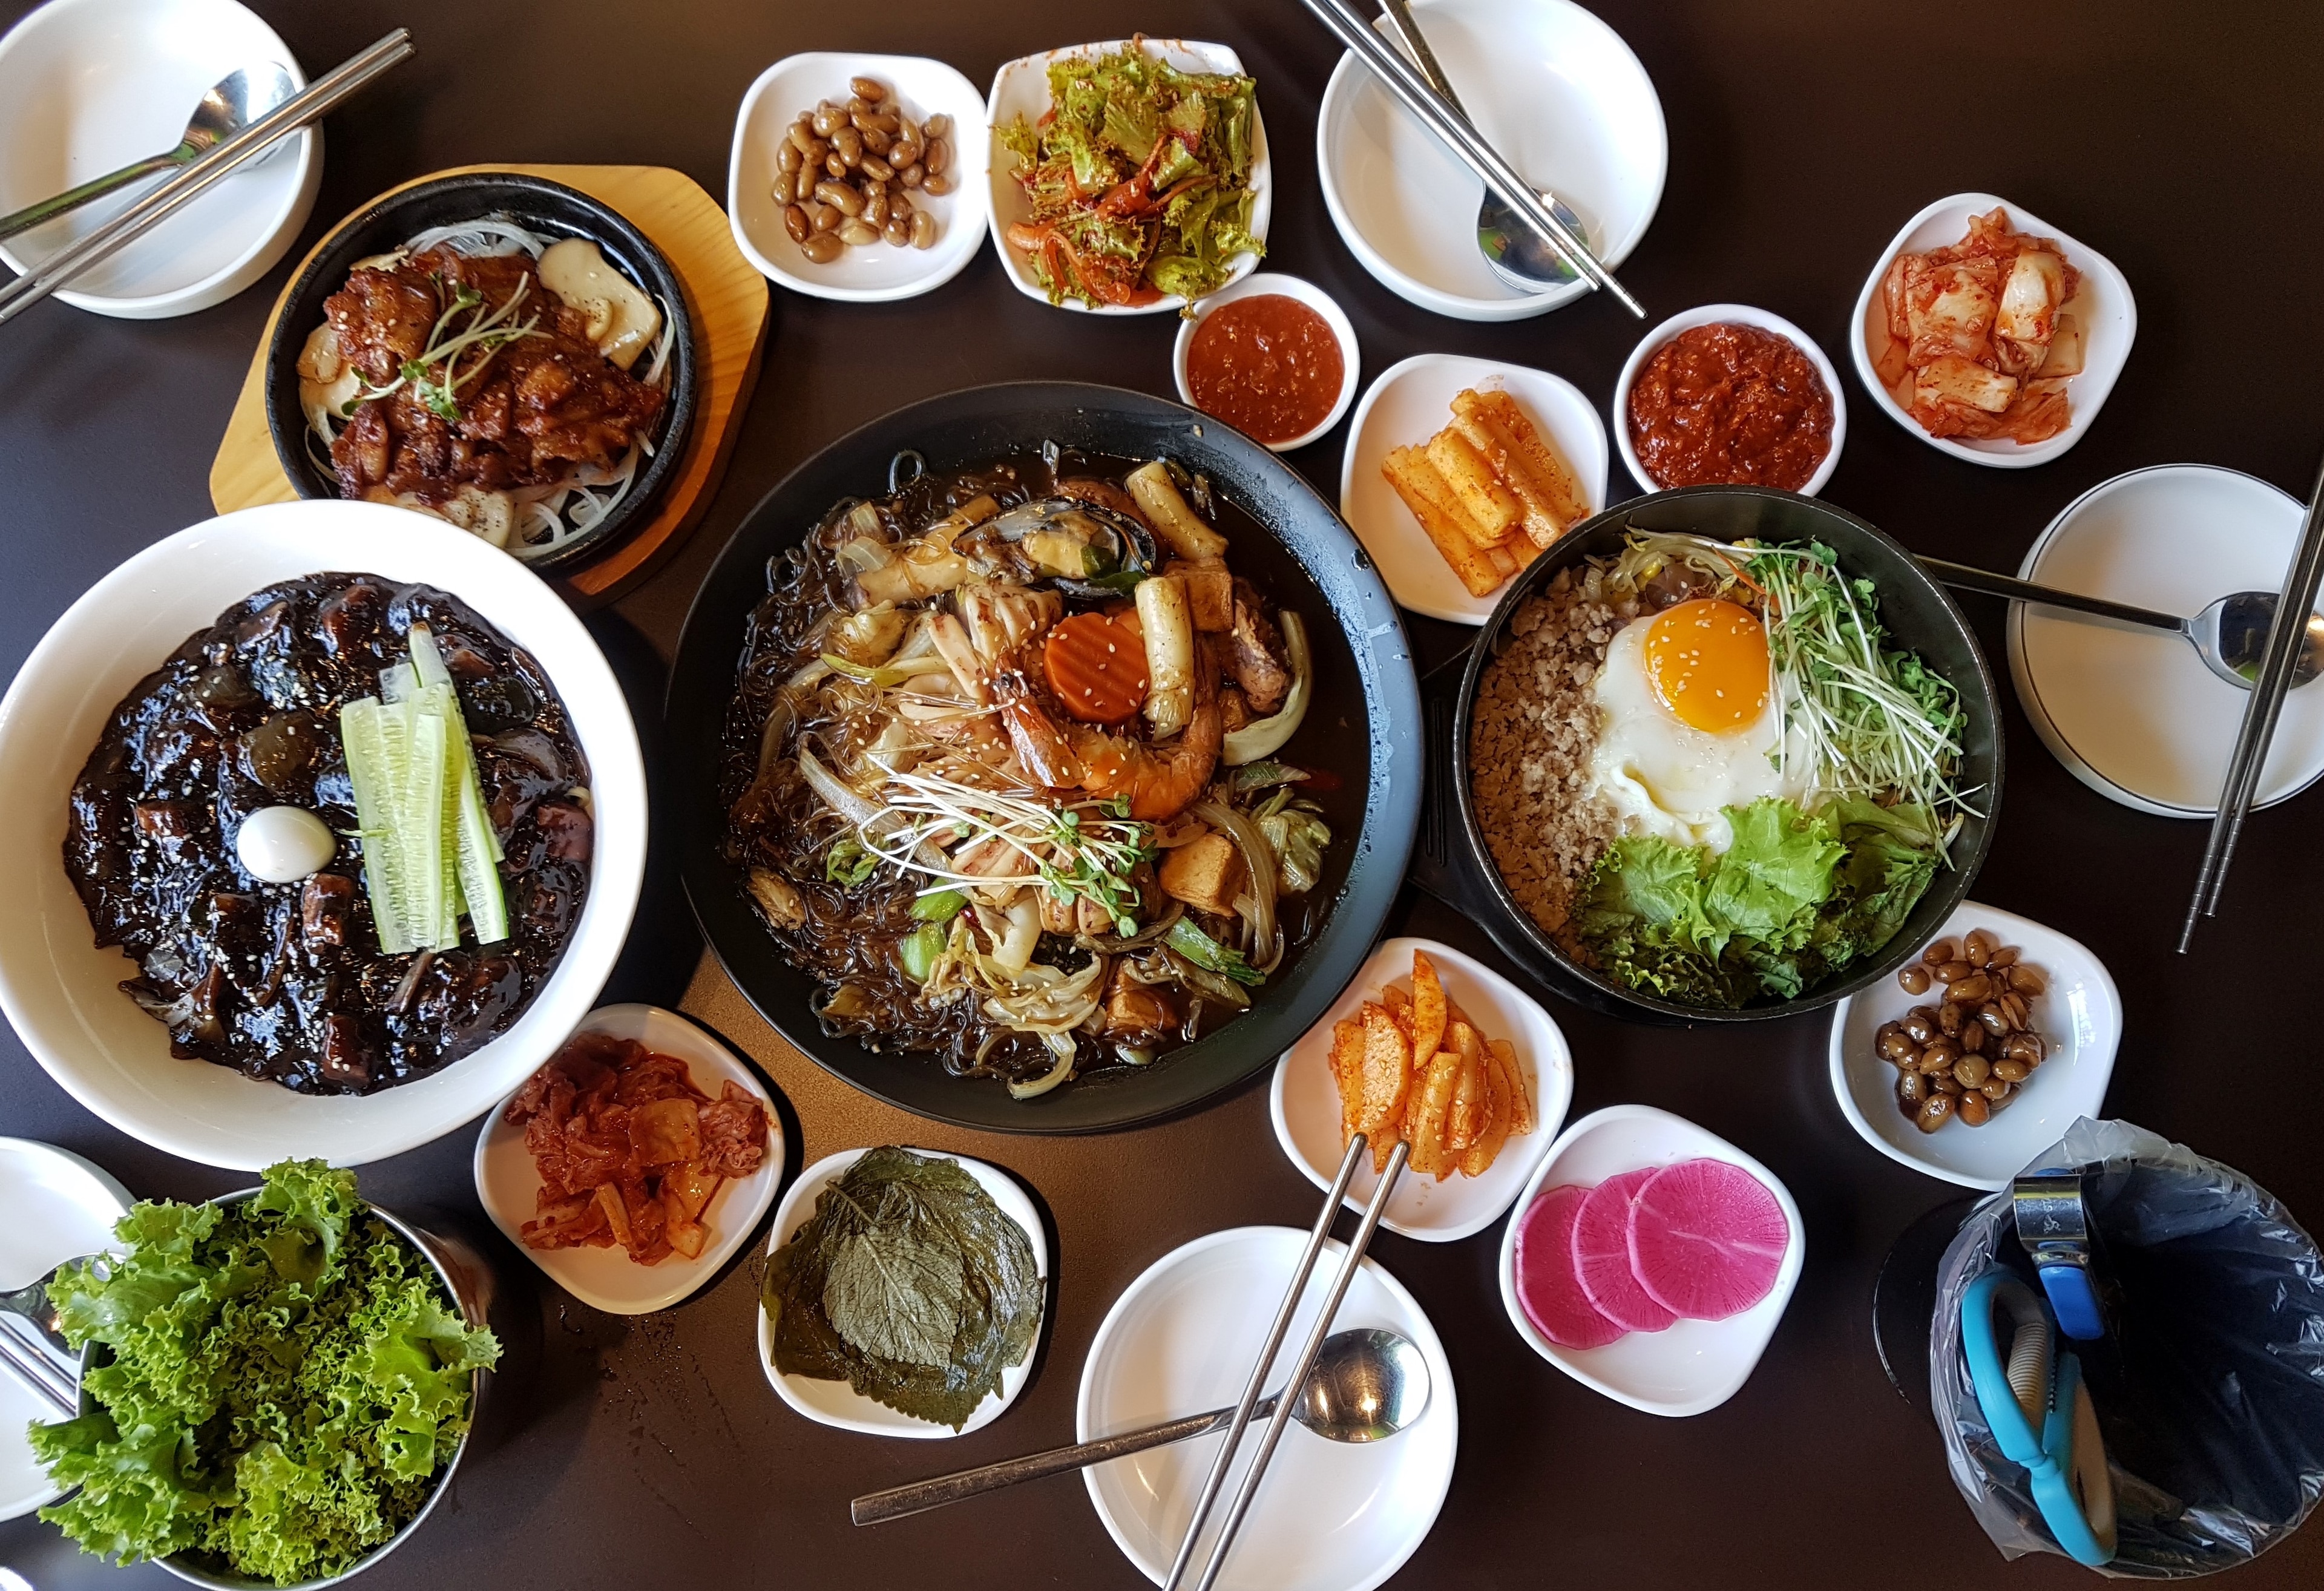 South Korean Food: 24 Traditional Dishes of South Korea